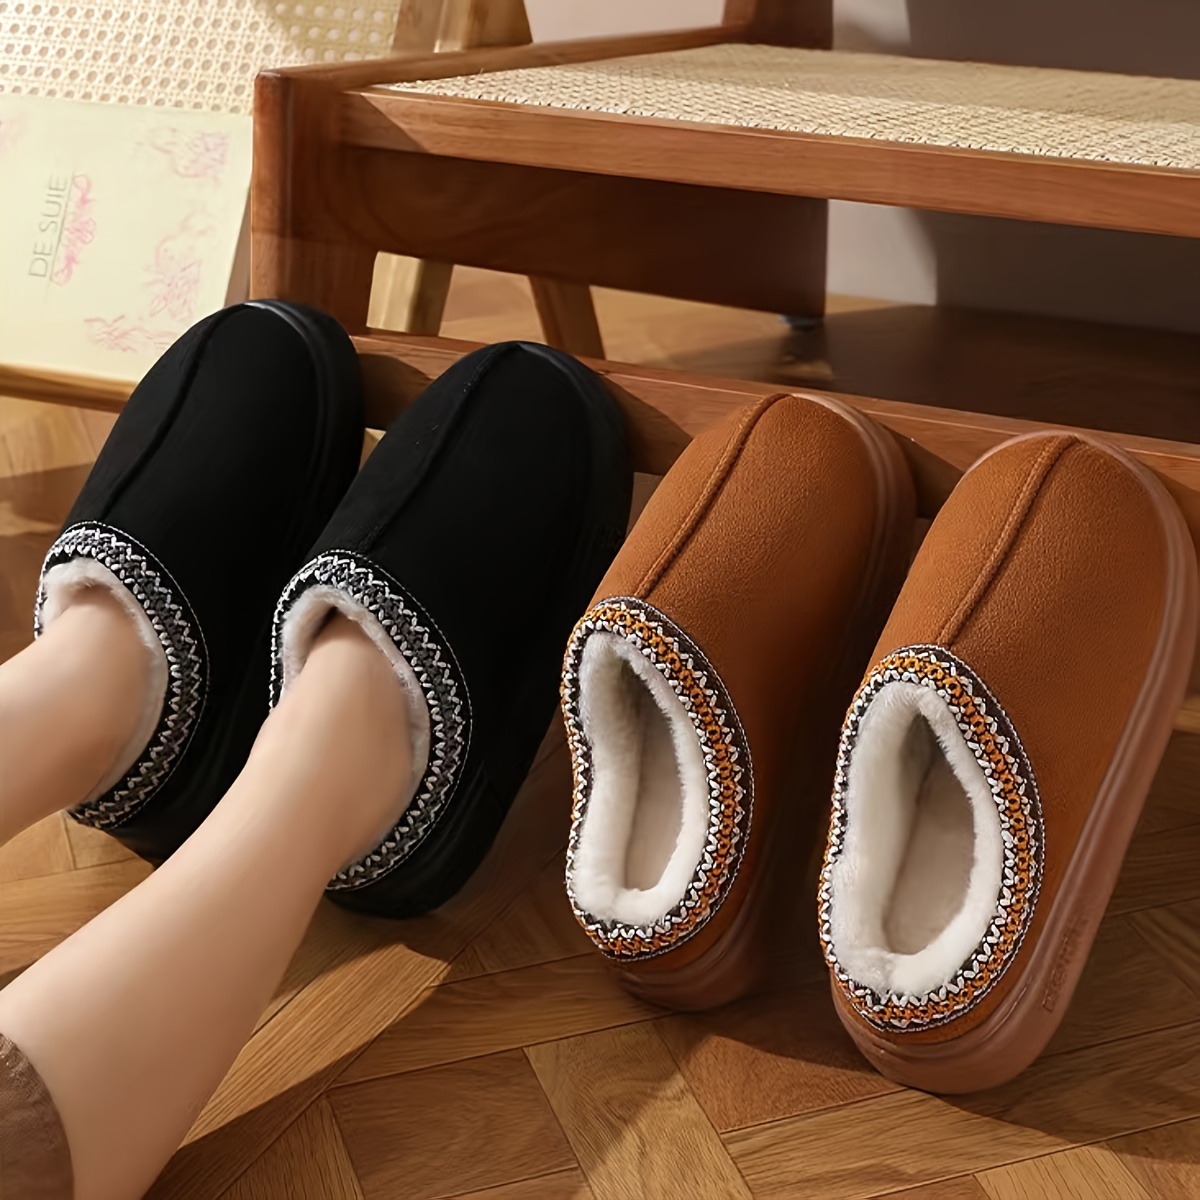 

Casual Comfort Solid Color Slippers For Men And Women - Memory Foam Insole, Warm Fabric Lining, Stitched Upper Design, Non-slip Eva Sole, Easy Slip-on House Shoes For All Seasons